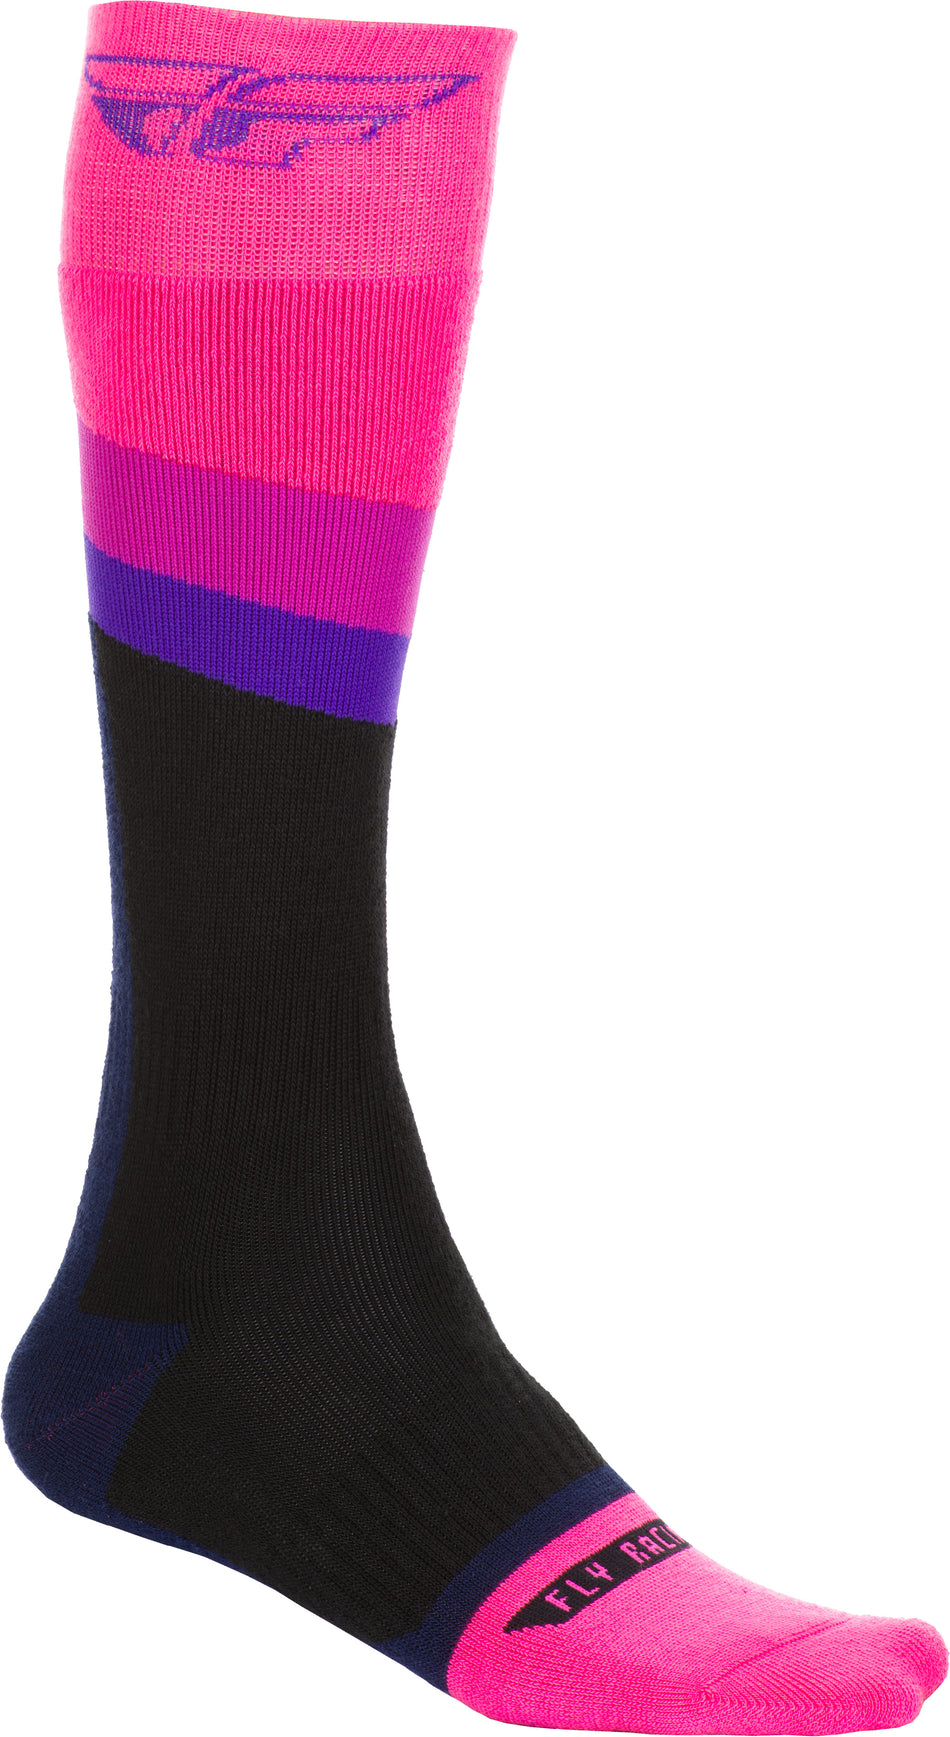 FLY RACING Fly Mx Socks Thick Pink/Black Sm/Md SPX009496-B1